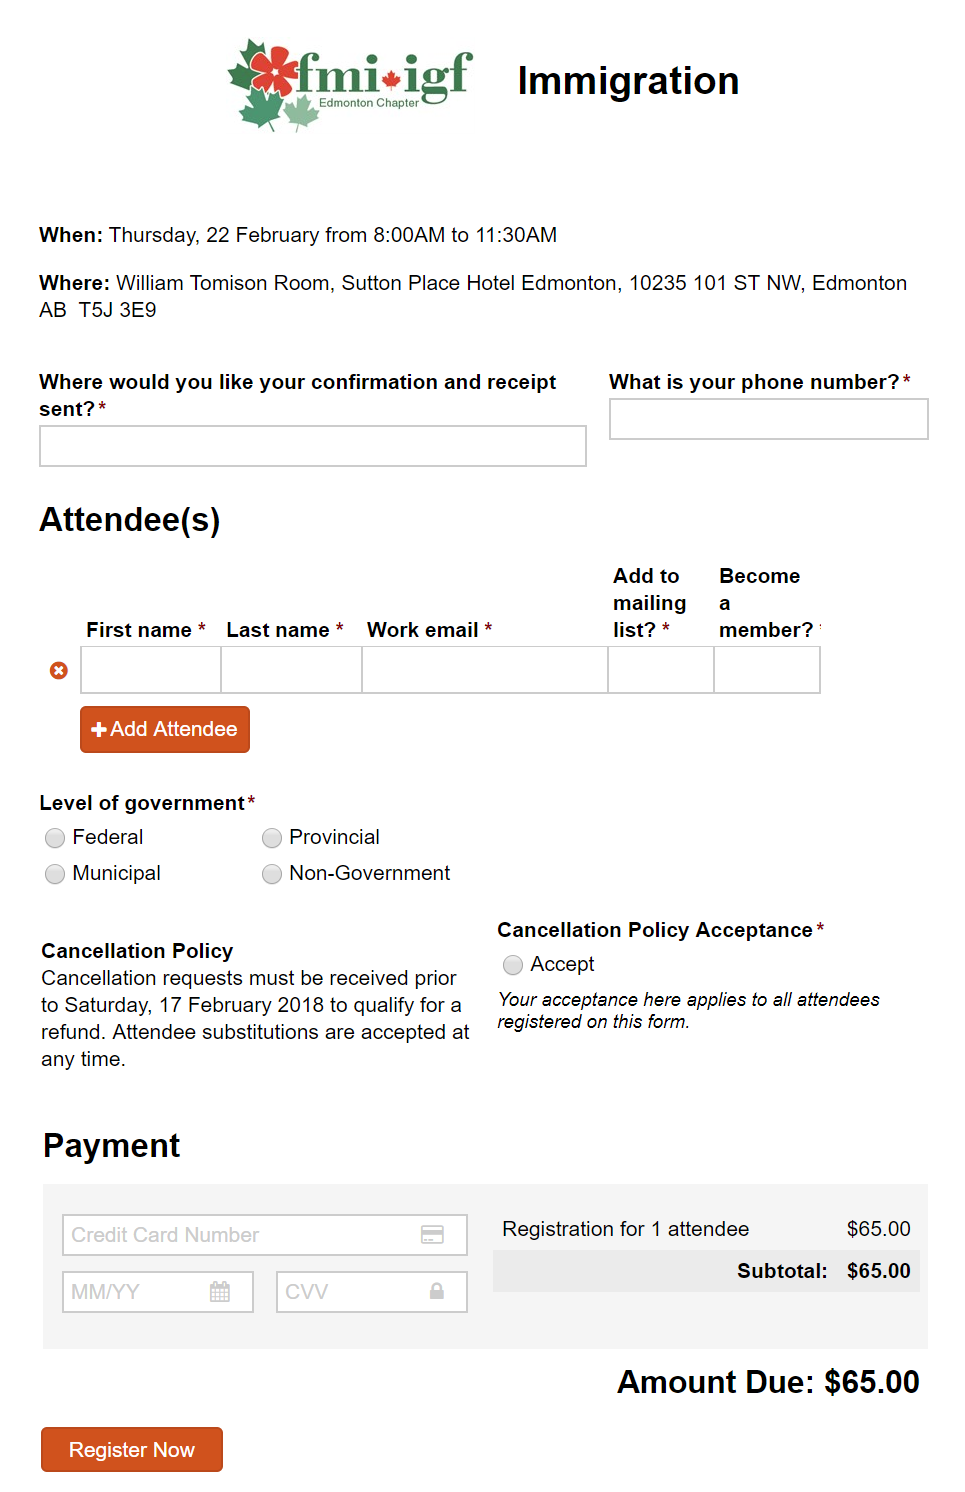 FMI Edmonton uses Cognito Forms for registrations.